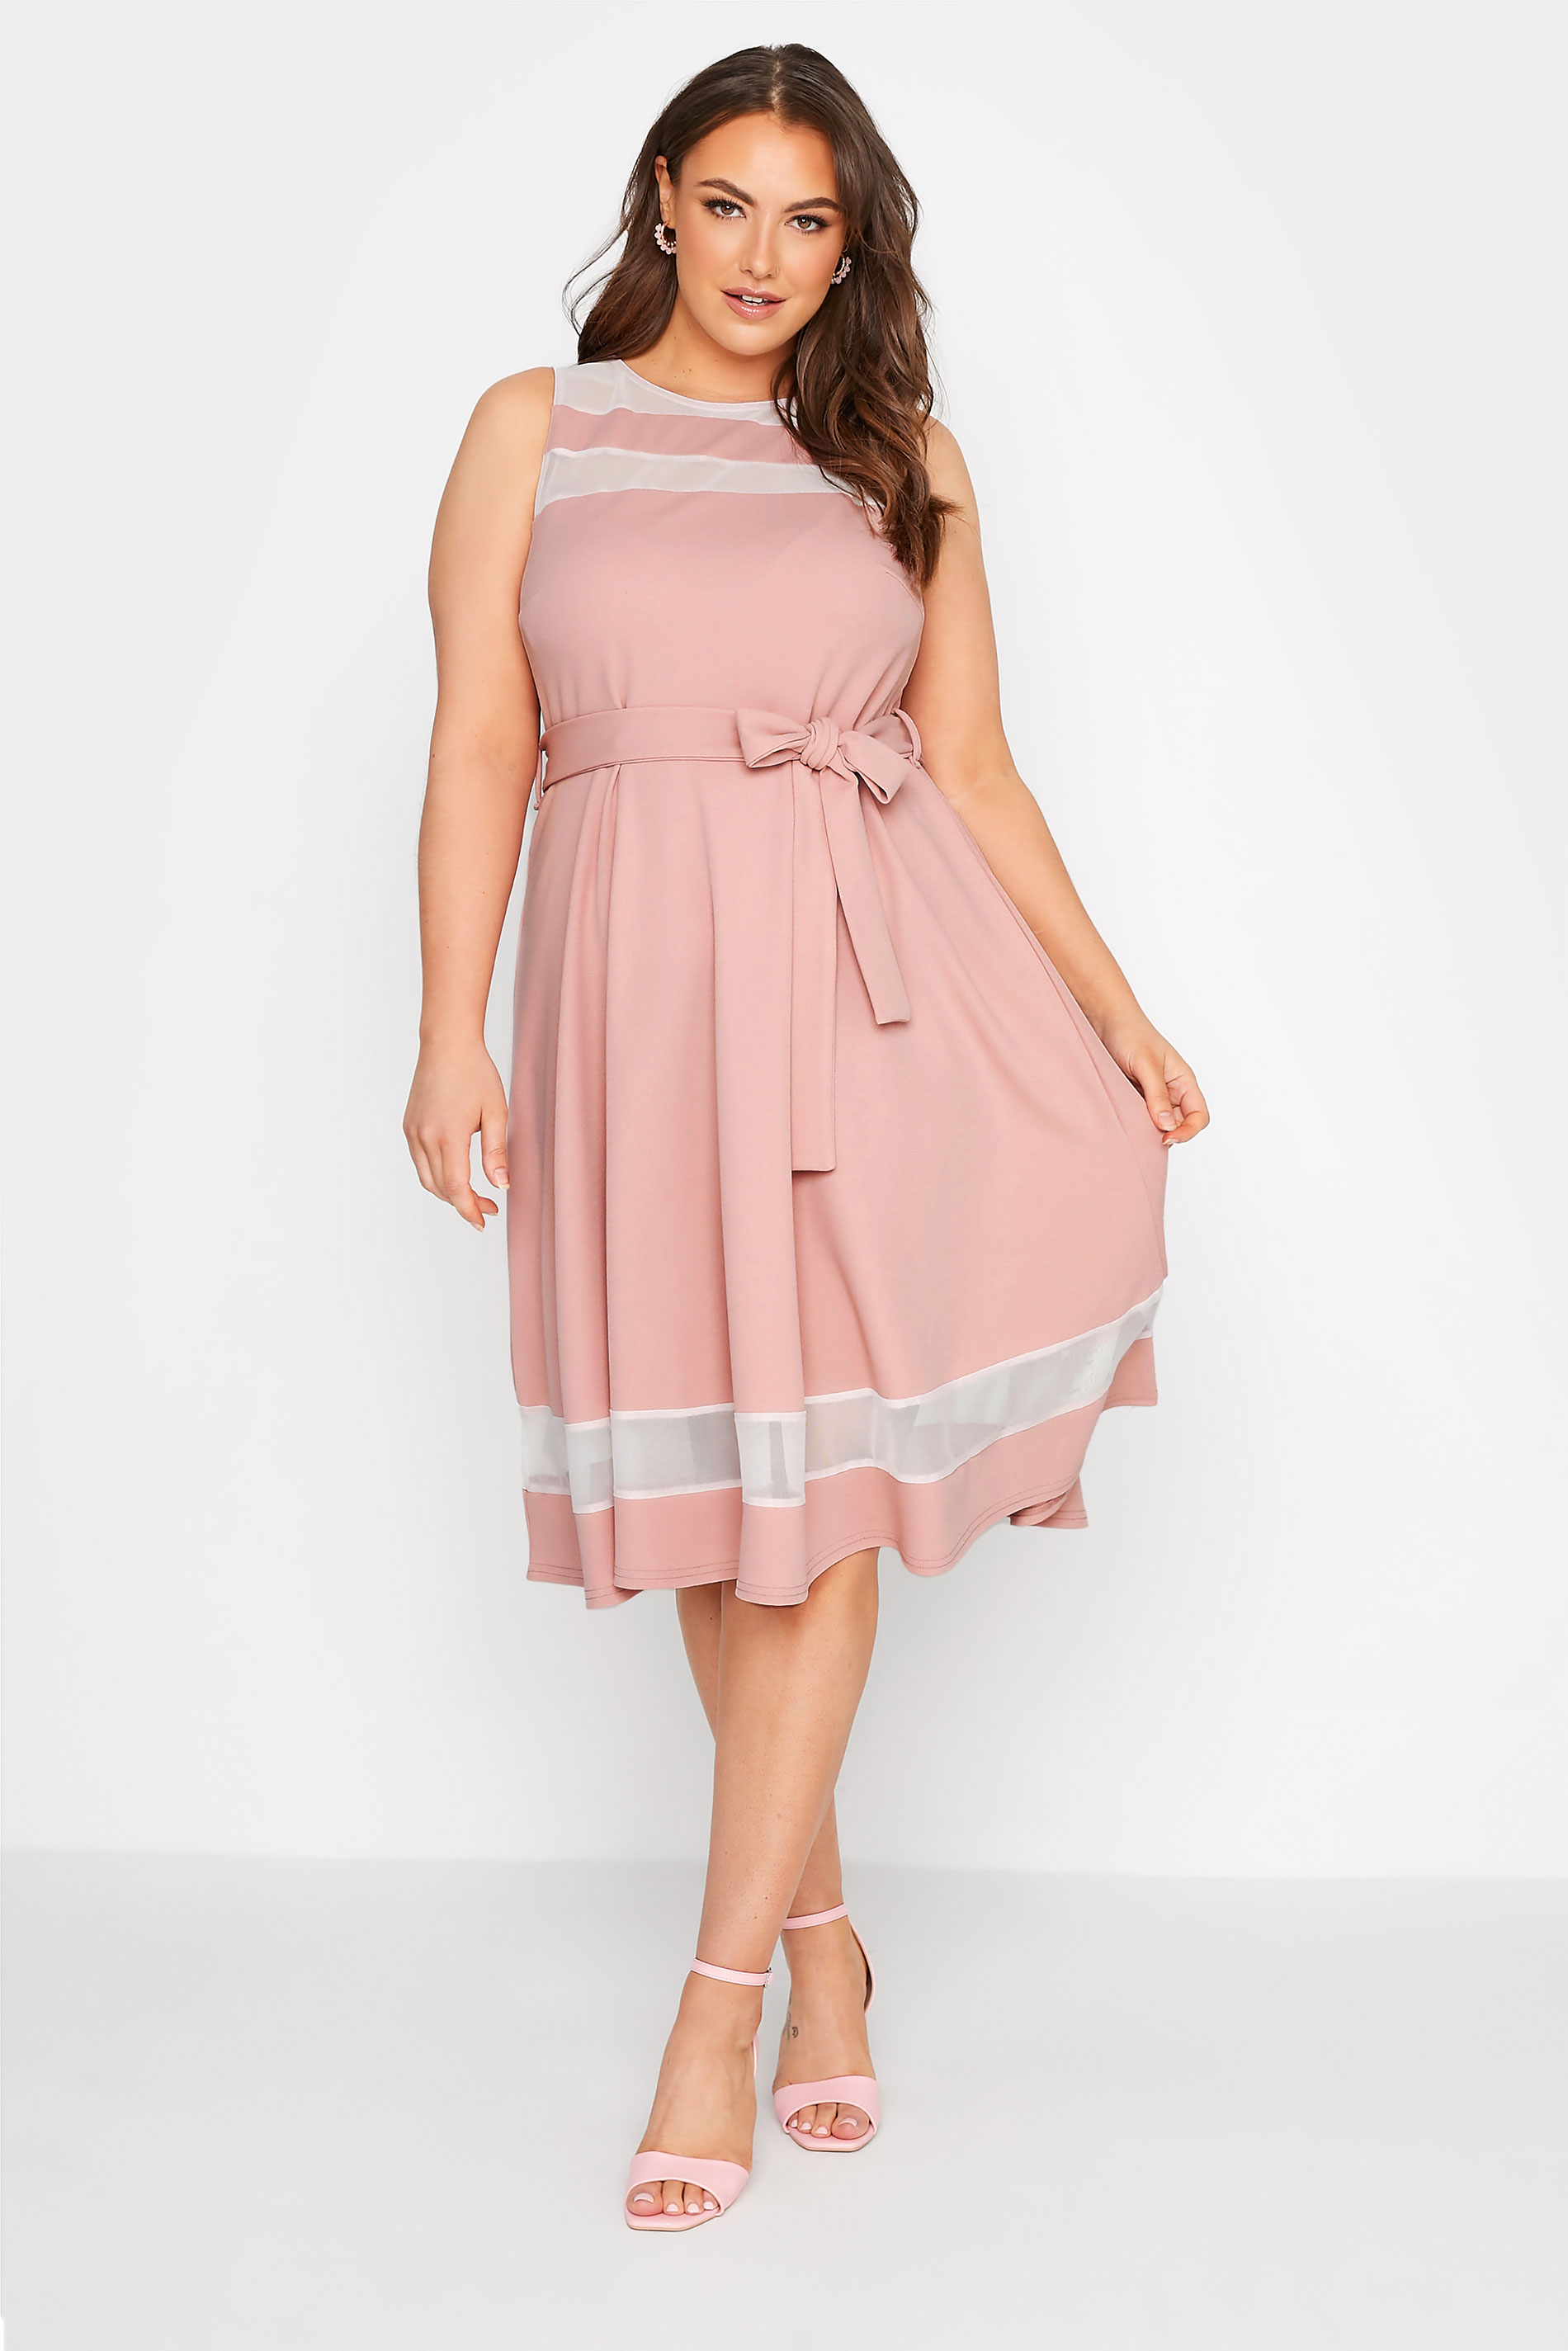 Robes Grande Taille Grande taille  Robes Patineuses | YOURS LONDON - Robe Rose Patineuse avec Ceinture - MV76925